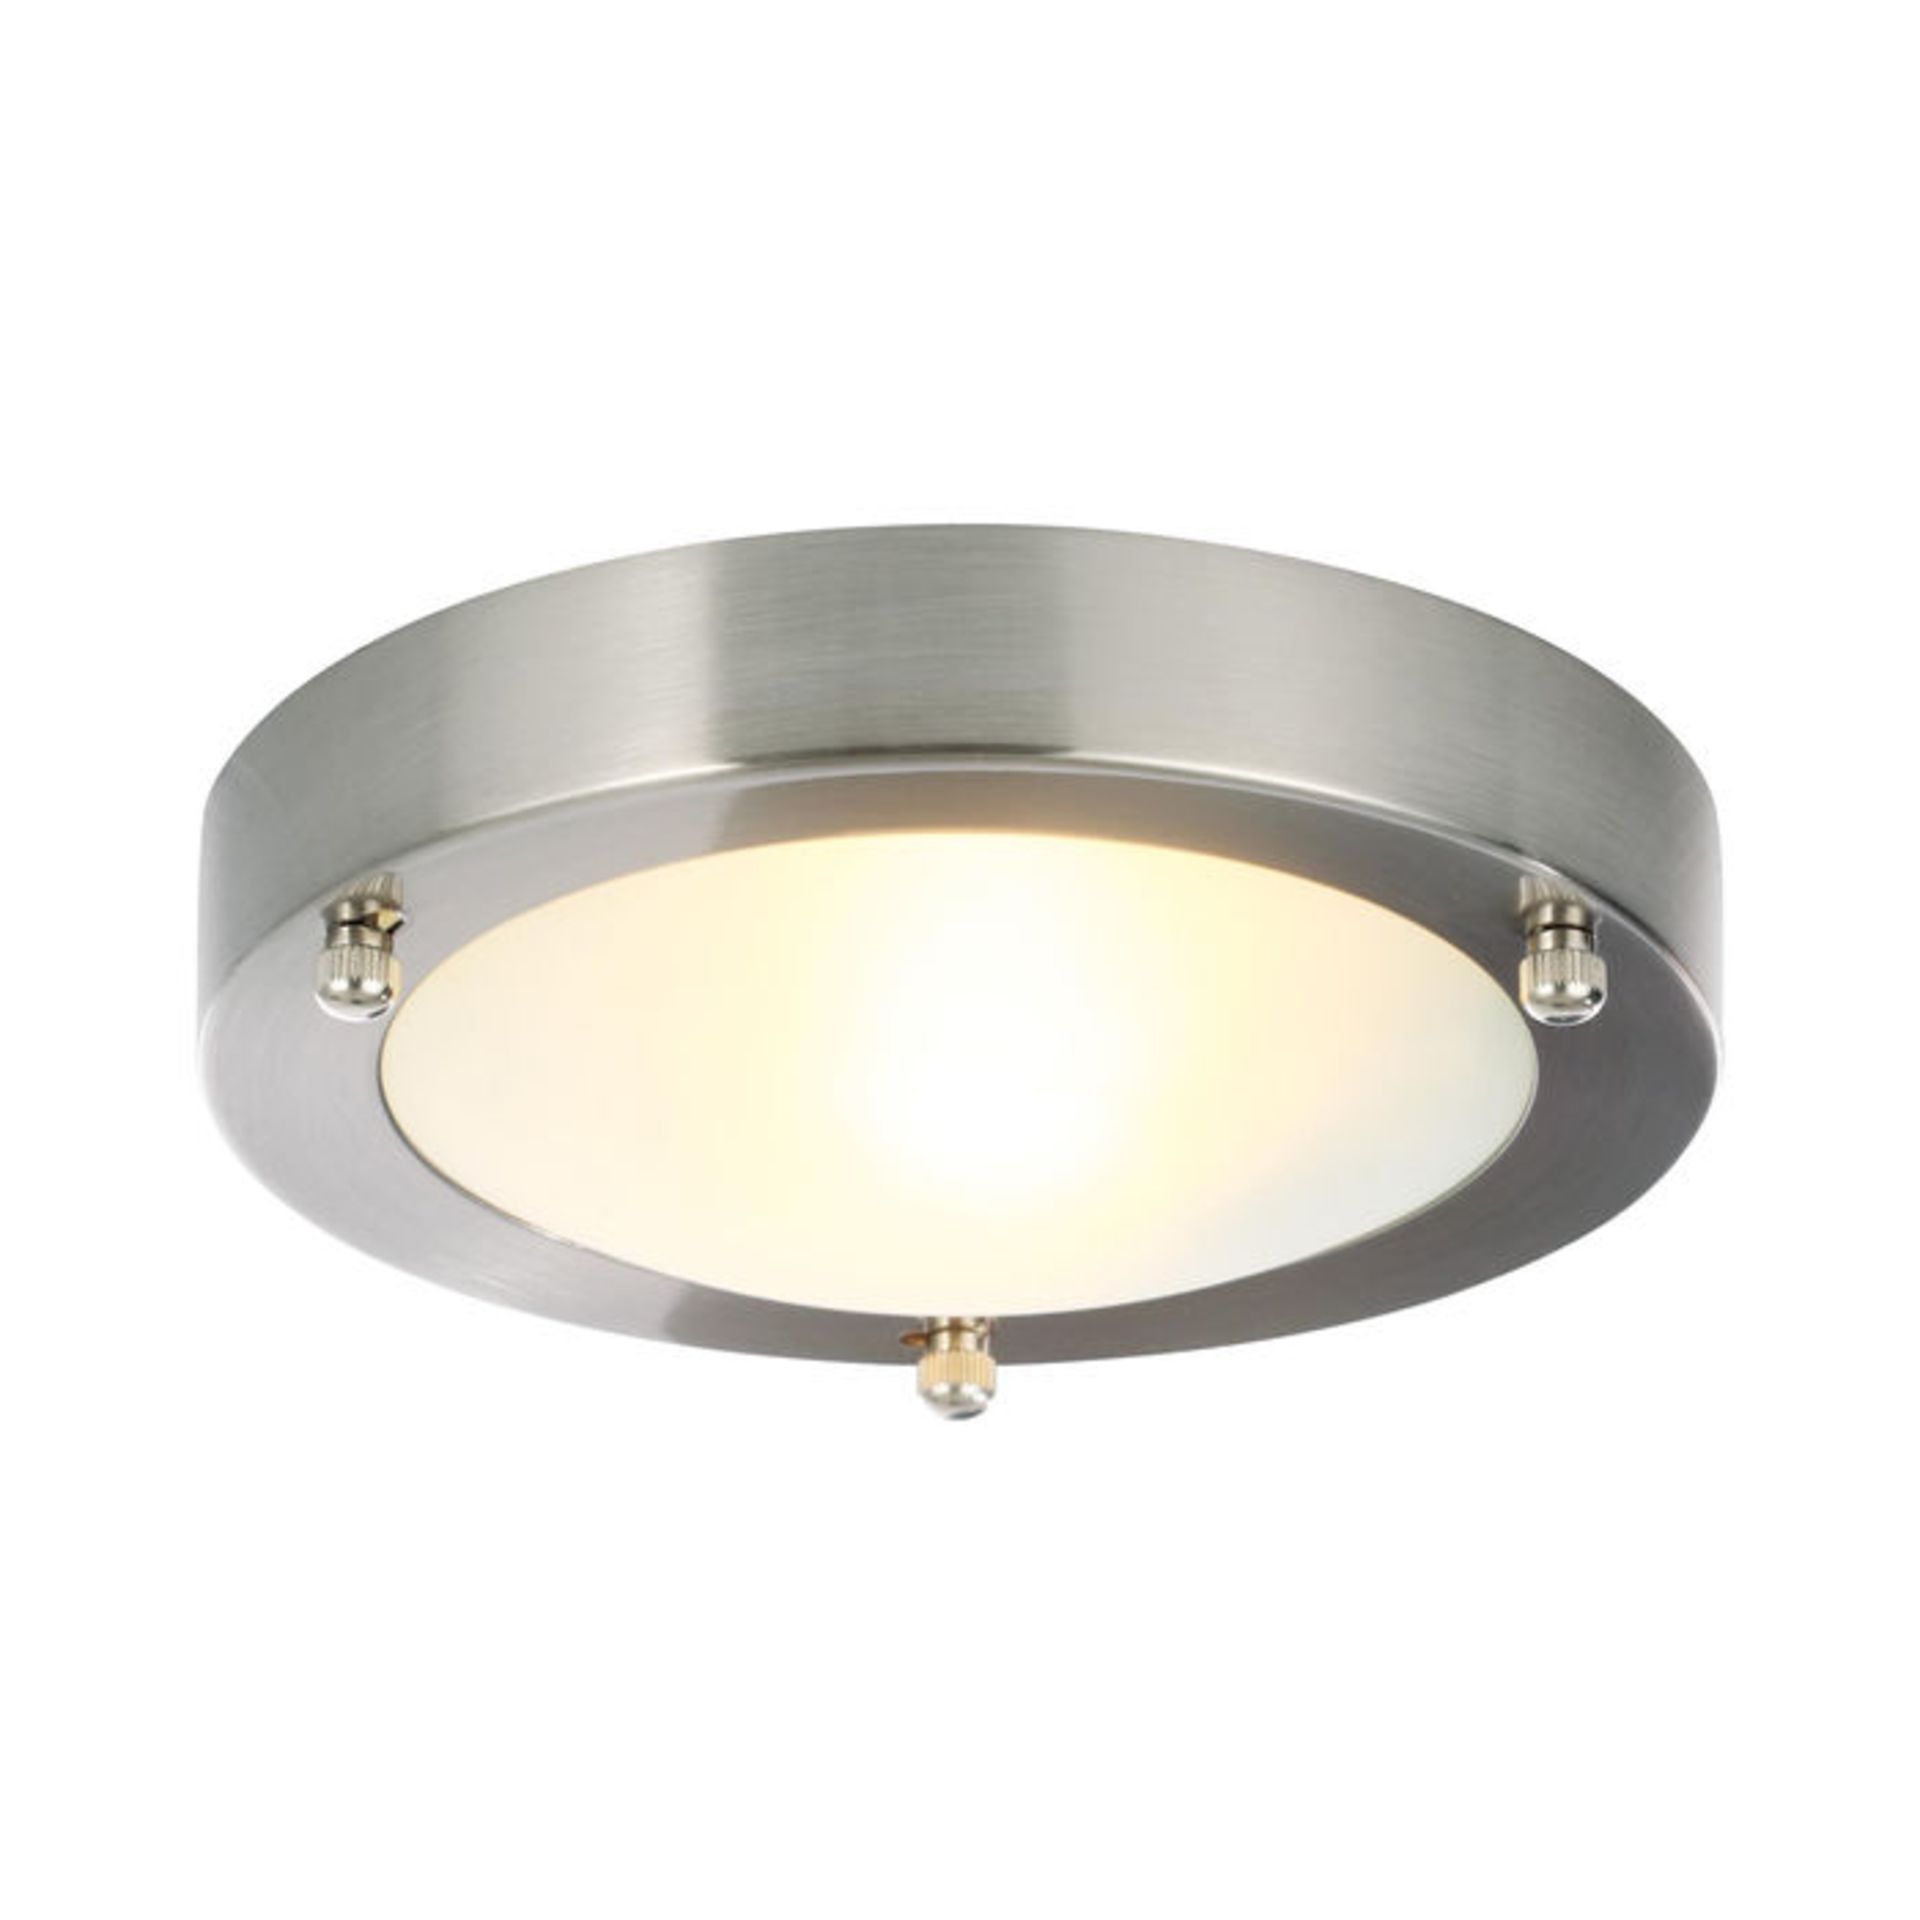 (AL41) Saturn Small Flush Ceiling Light Our flush fit sits closer to the ceiling, perfect for